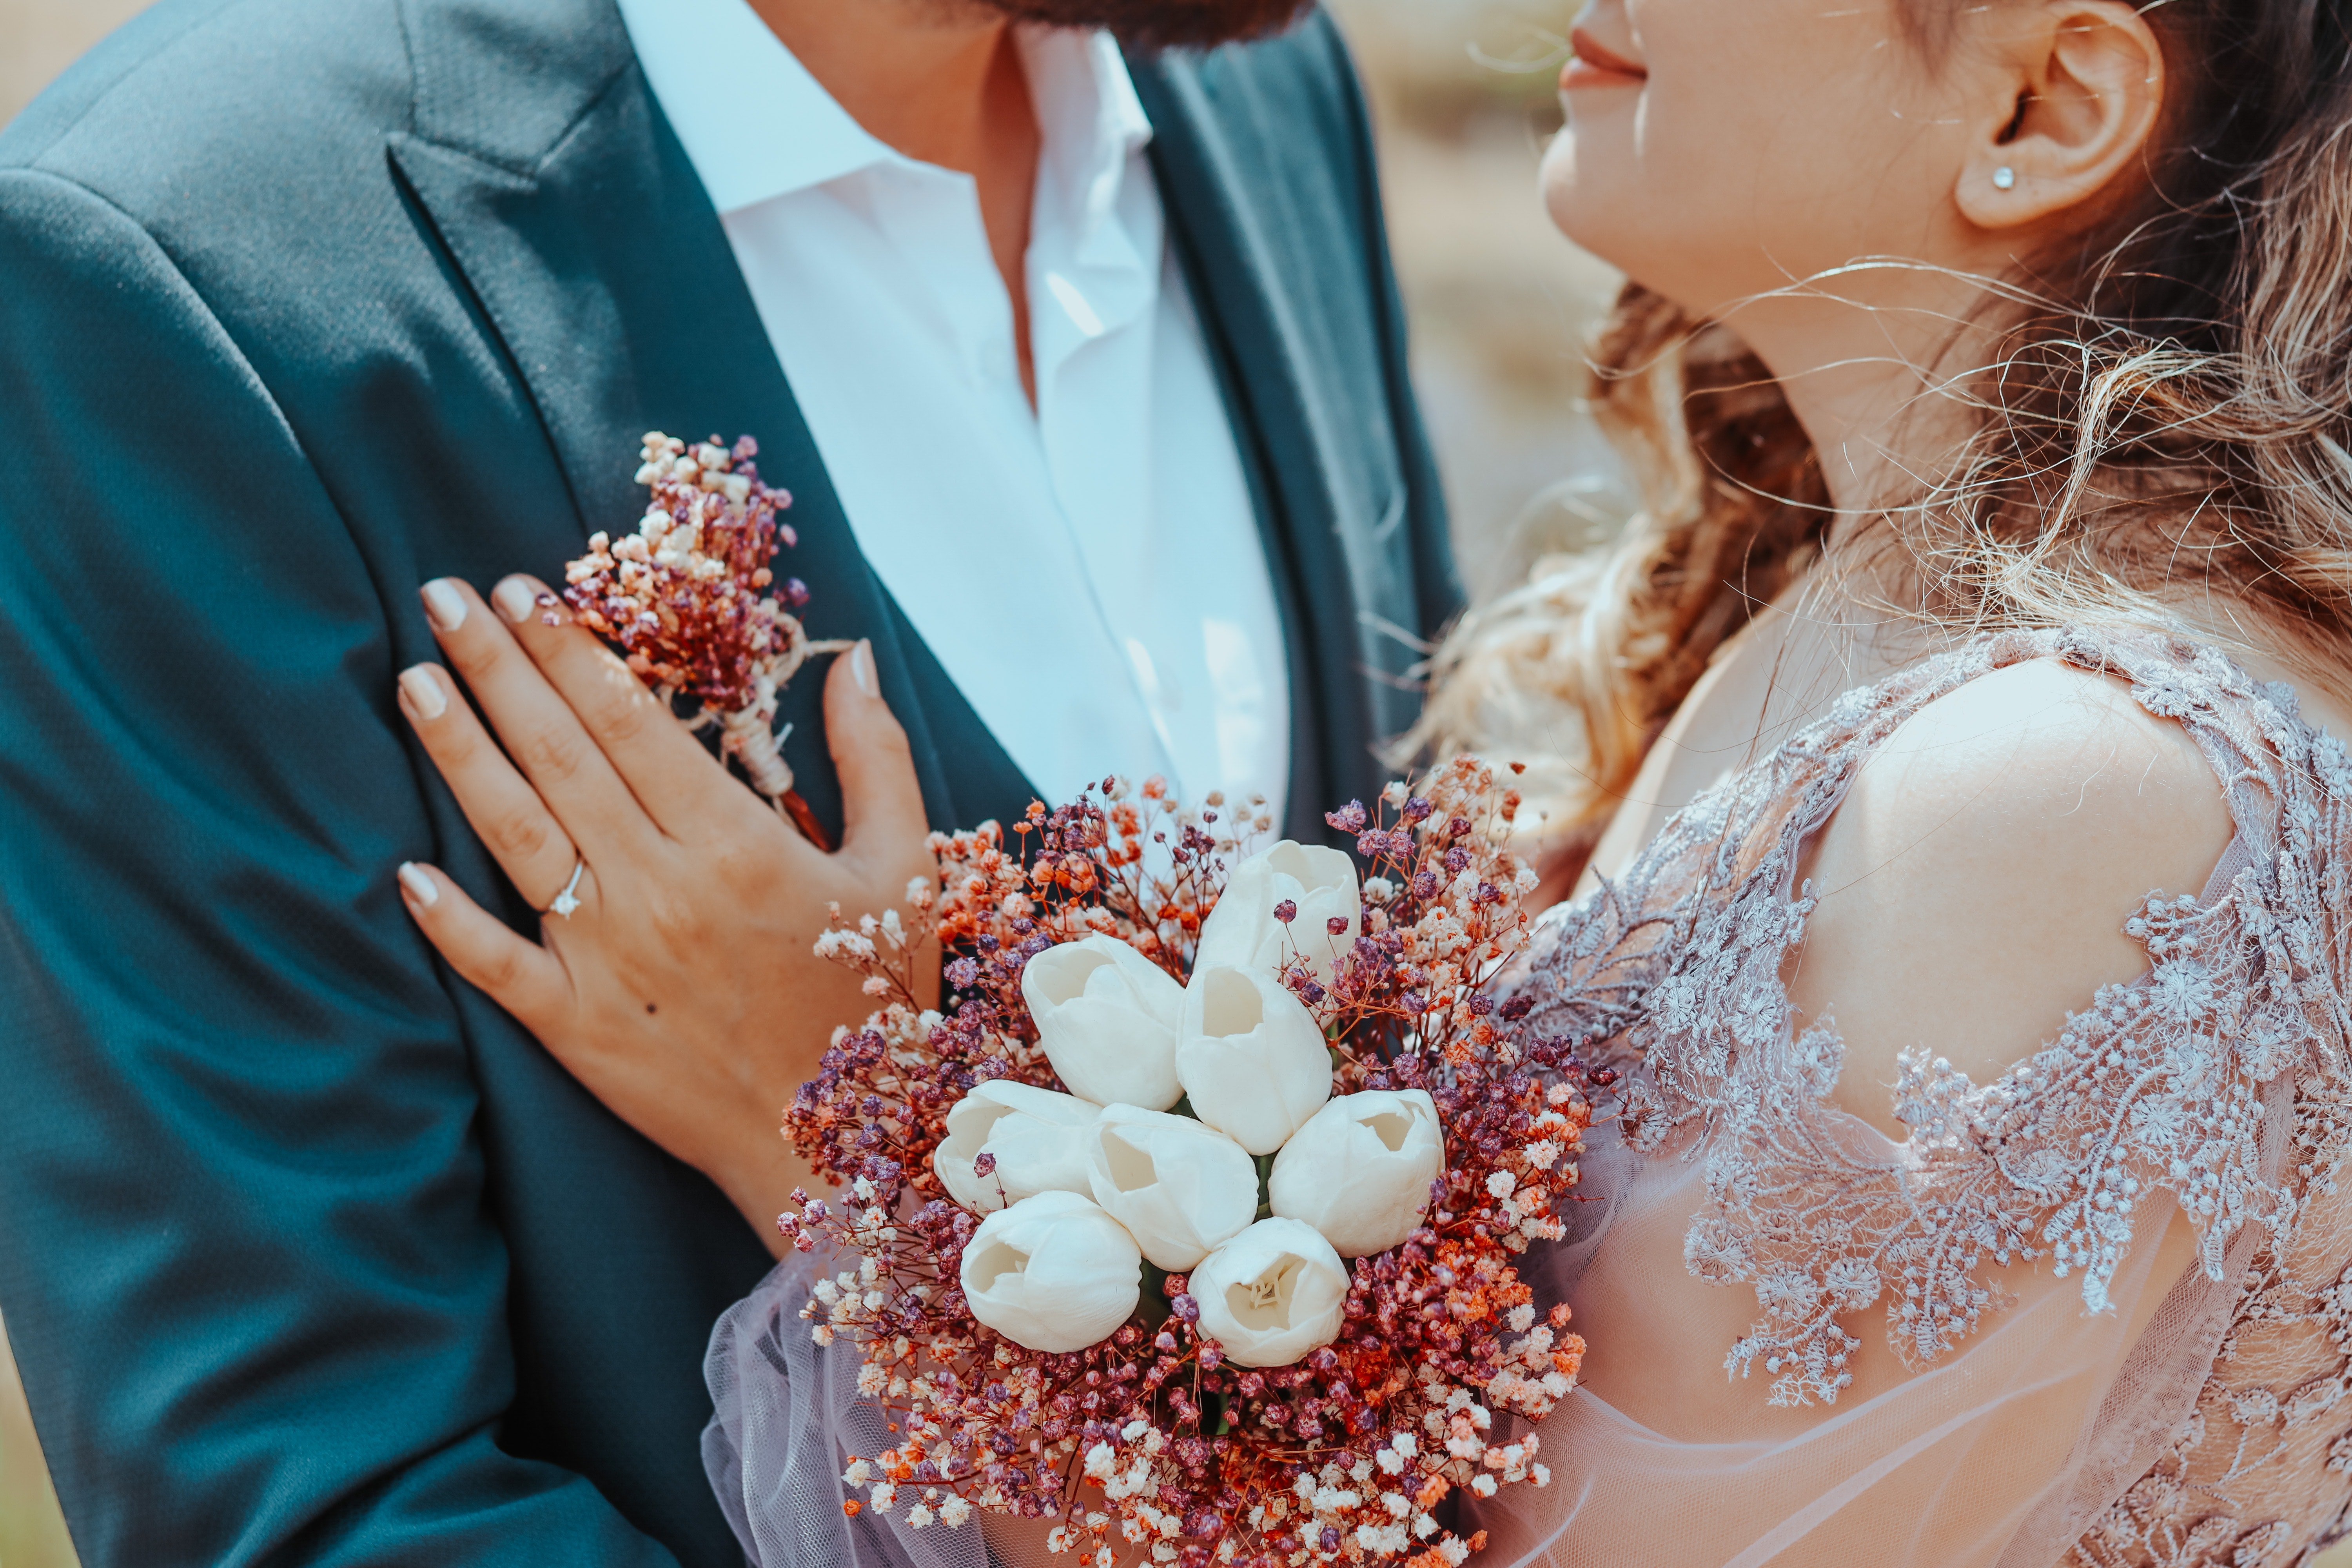 Marissa and Joshua asked Mark to get changed so they could all go to the wedding together. | Source: Pexels